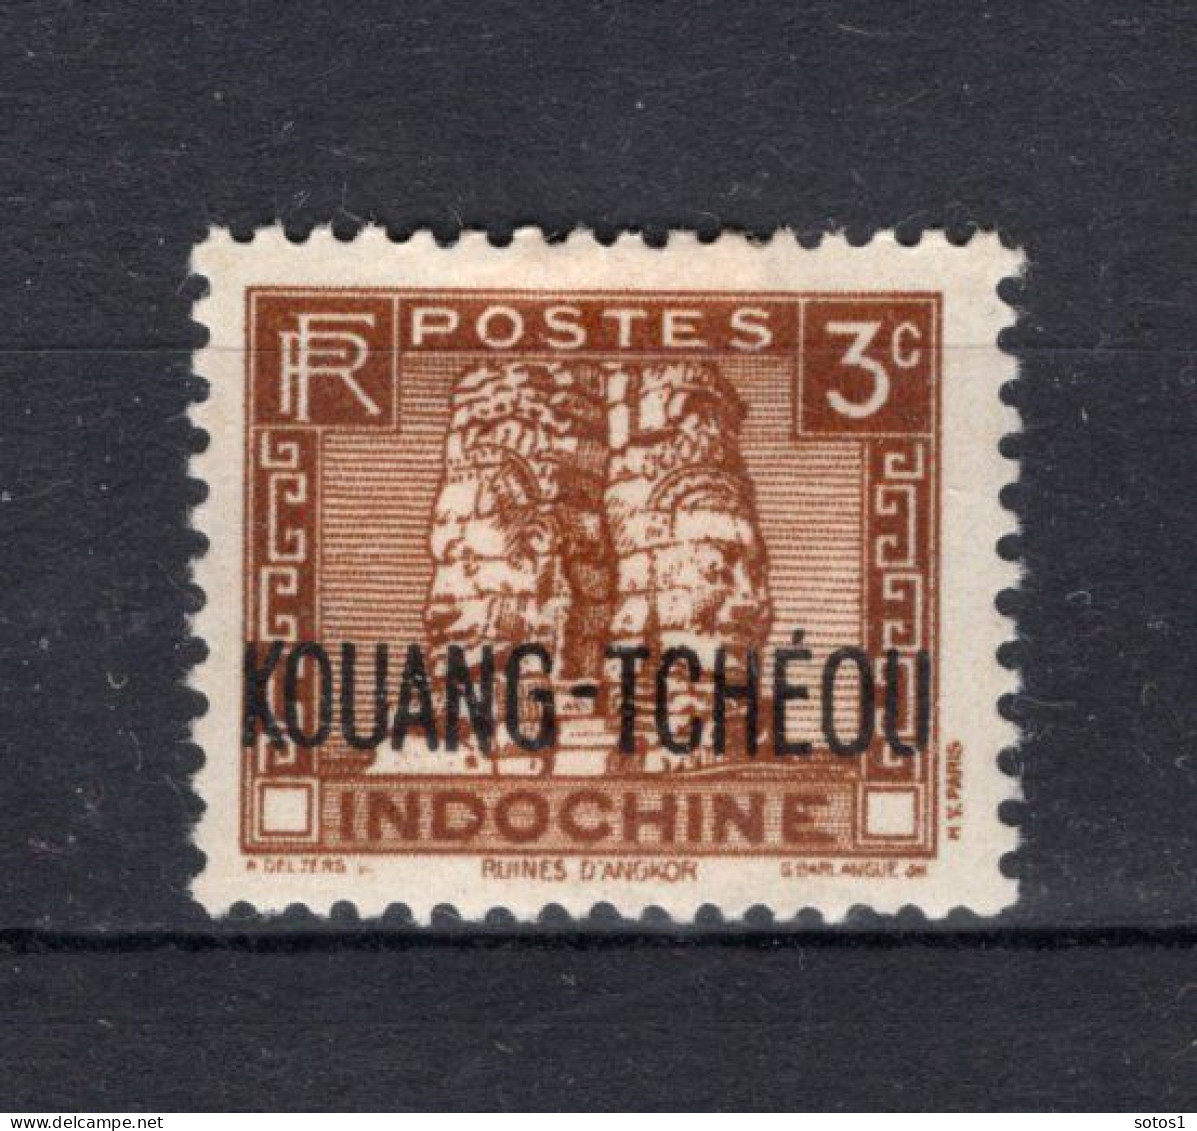 KOUANG-TCHEOU Yt. 125 MH 1941 - Unused Stamps